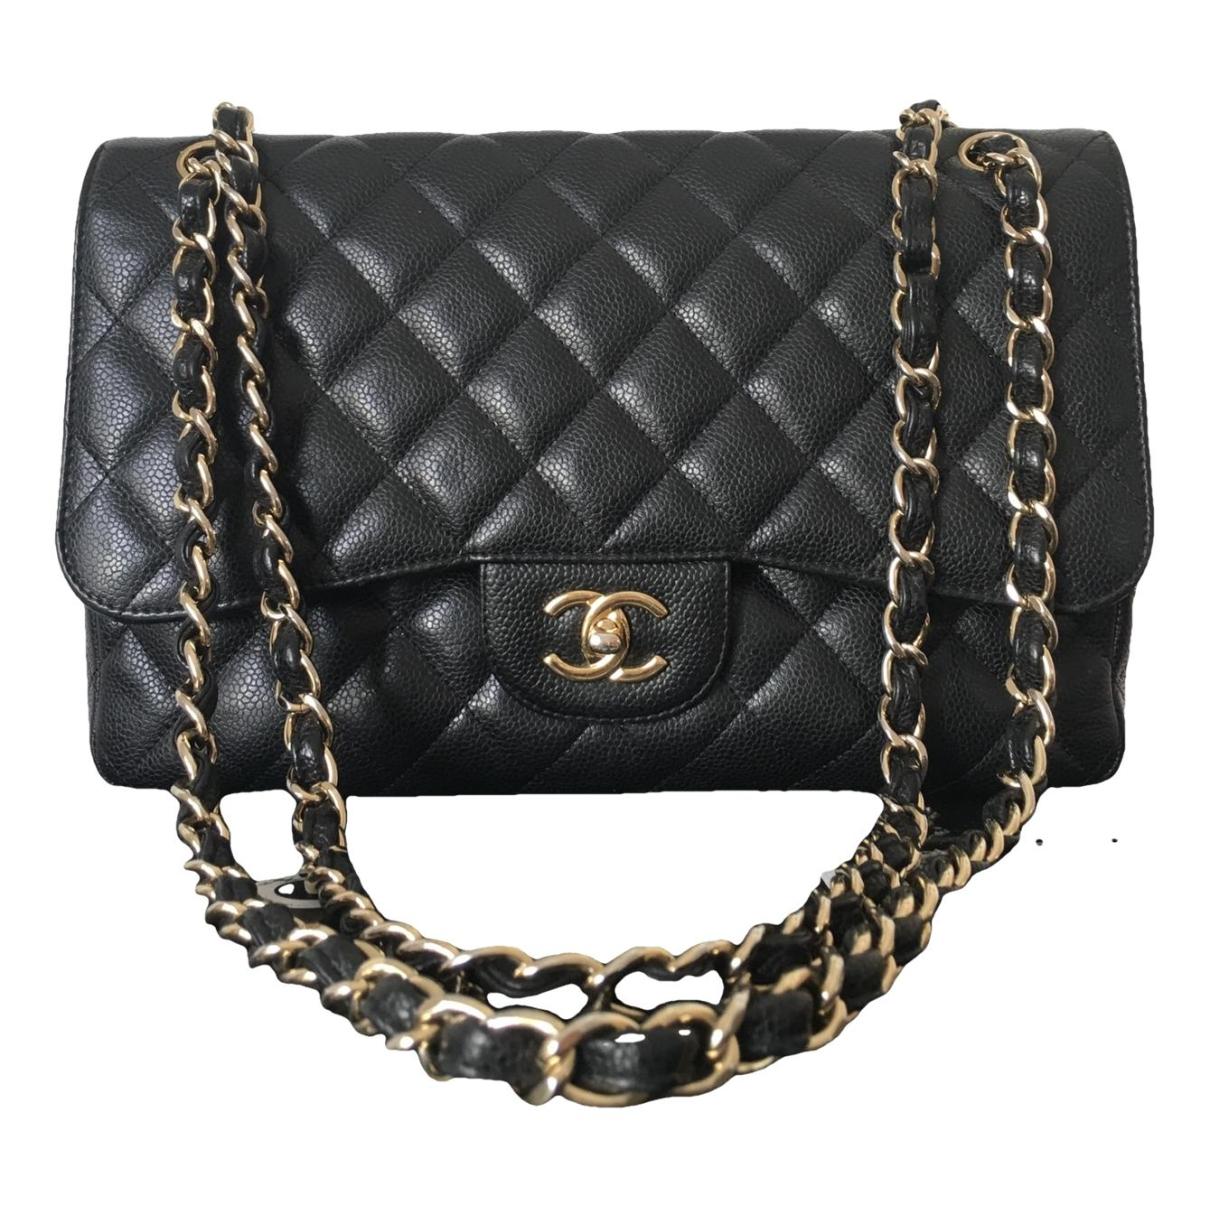 Timeless/classique leather crossbody bag Chanel Black in Leather - 35087113